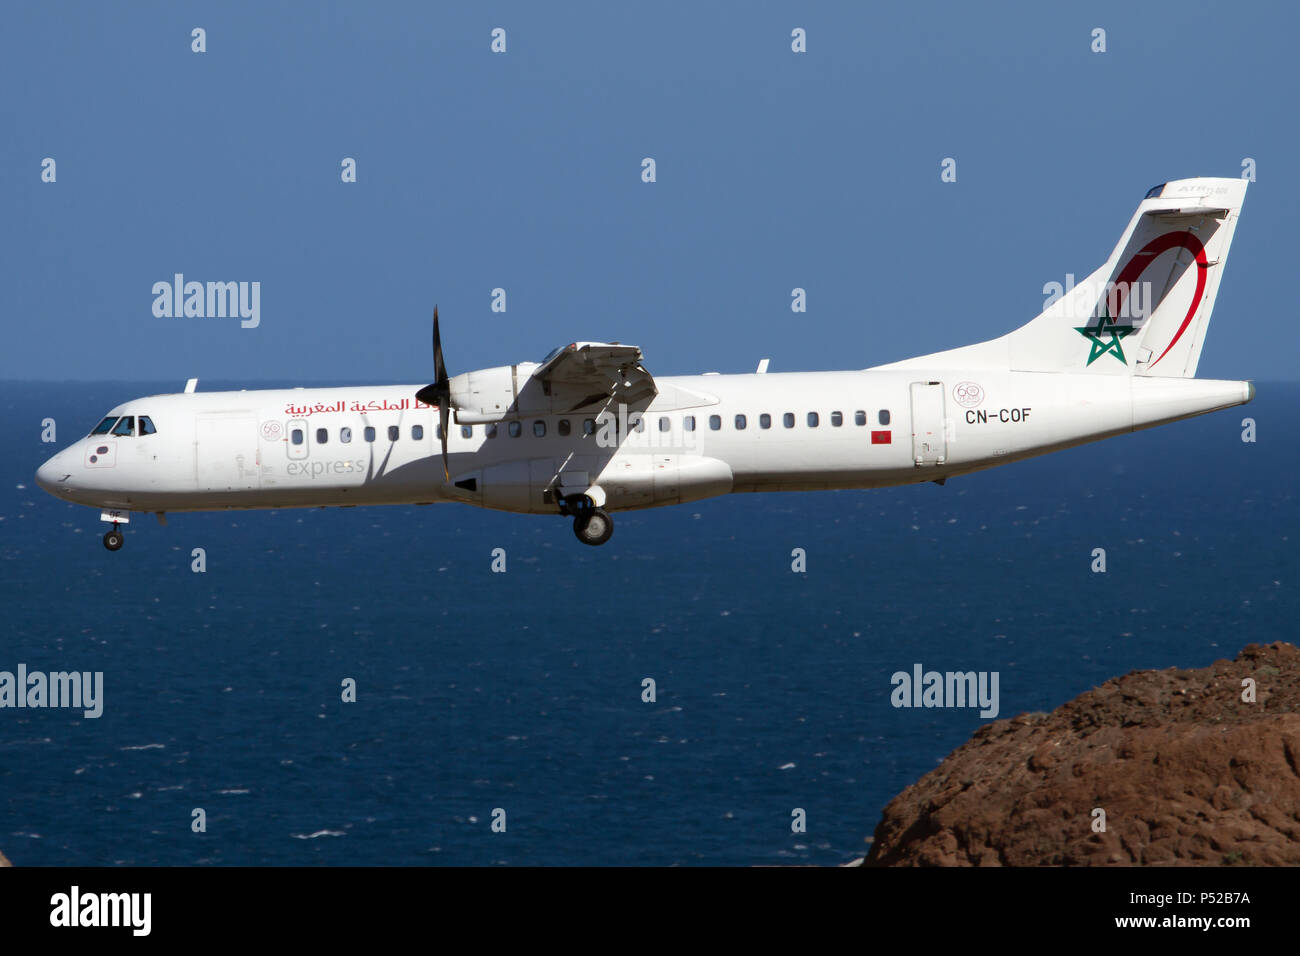 Page 3 - Royal Air Maroc High Resolution Stock Photography and Images -  Alamy